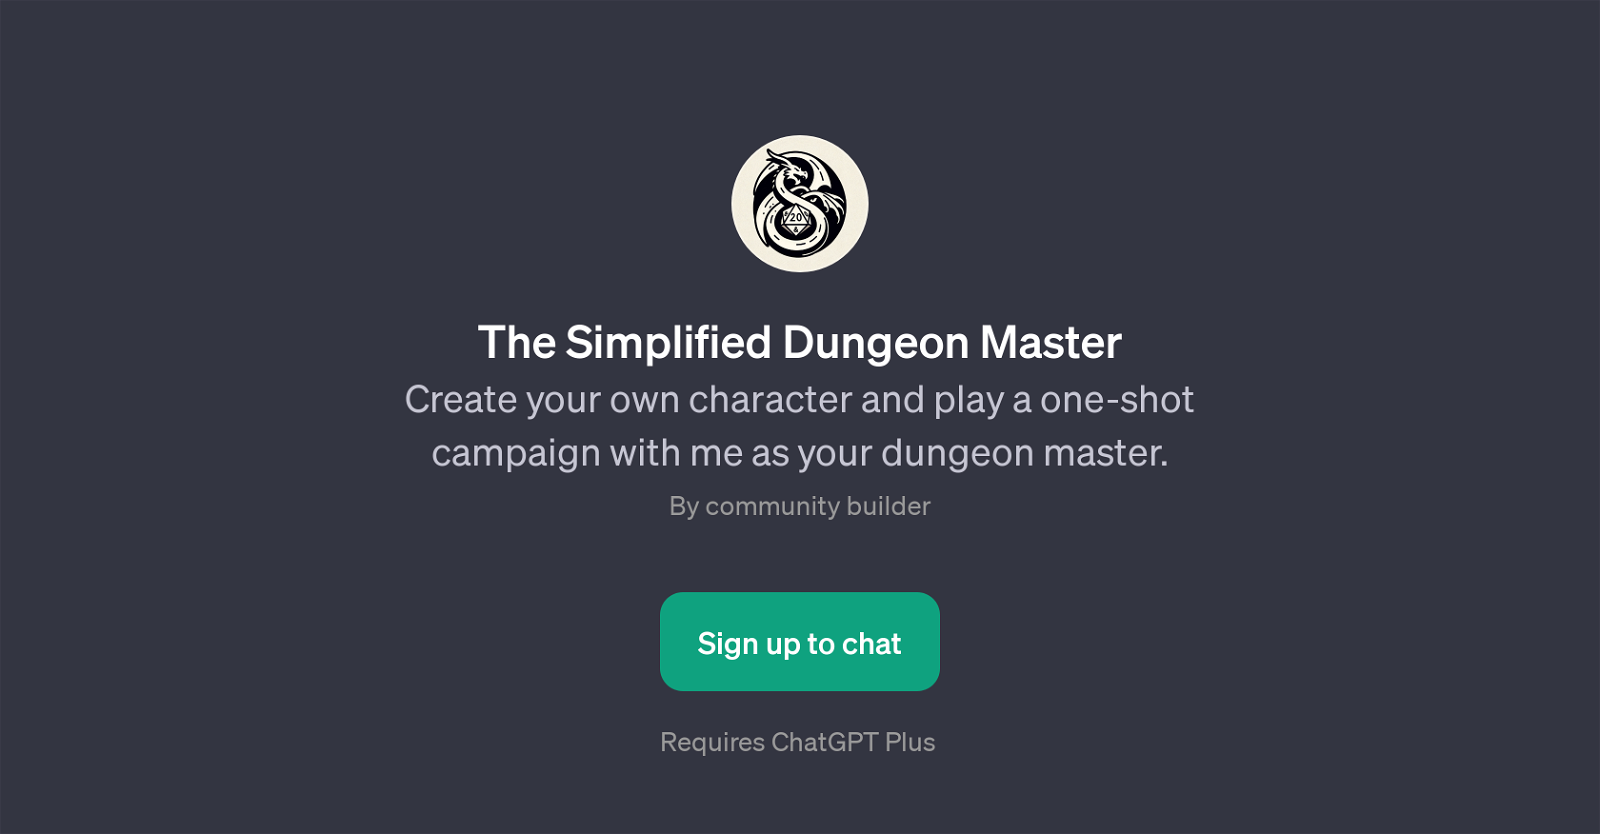 The Simplified Dungeon Master website